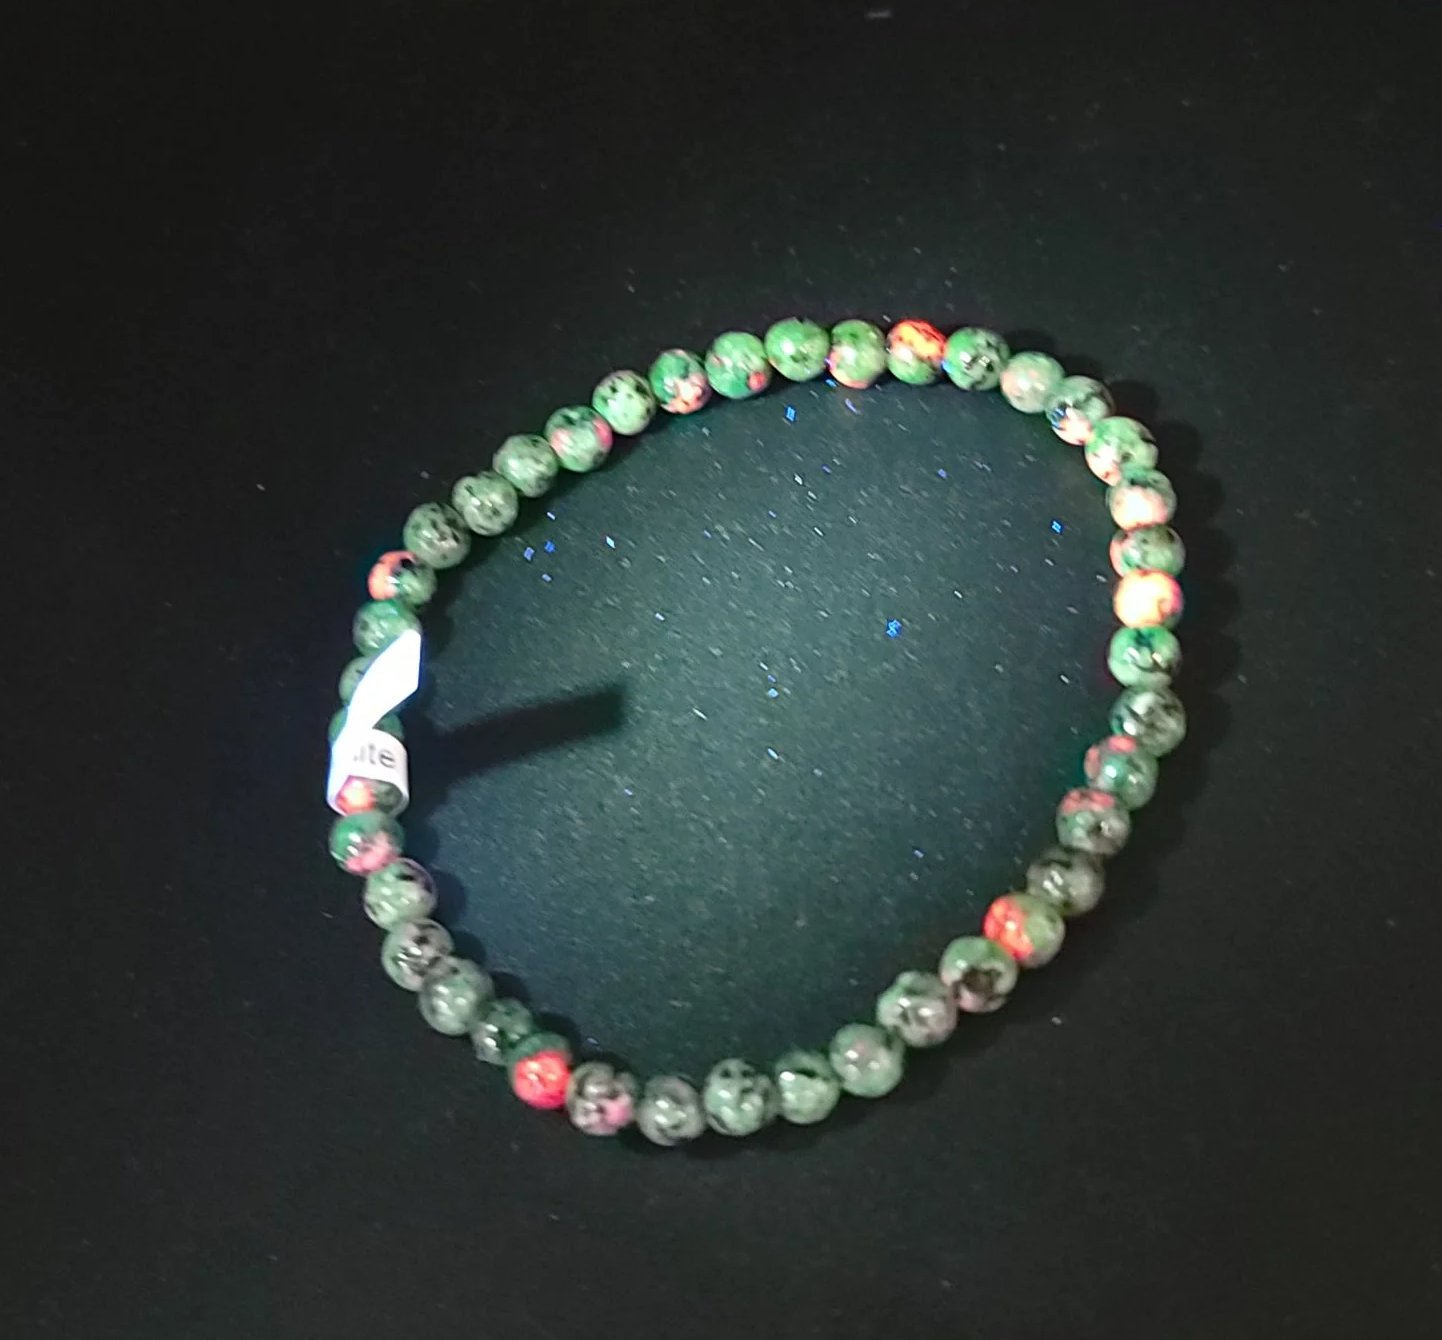 Ruby Zoisite Bead Bracelet 4mm - Elevated Metaphysical